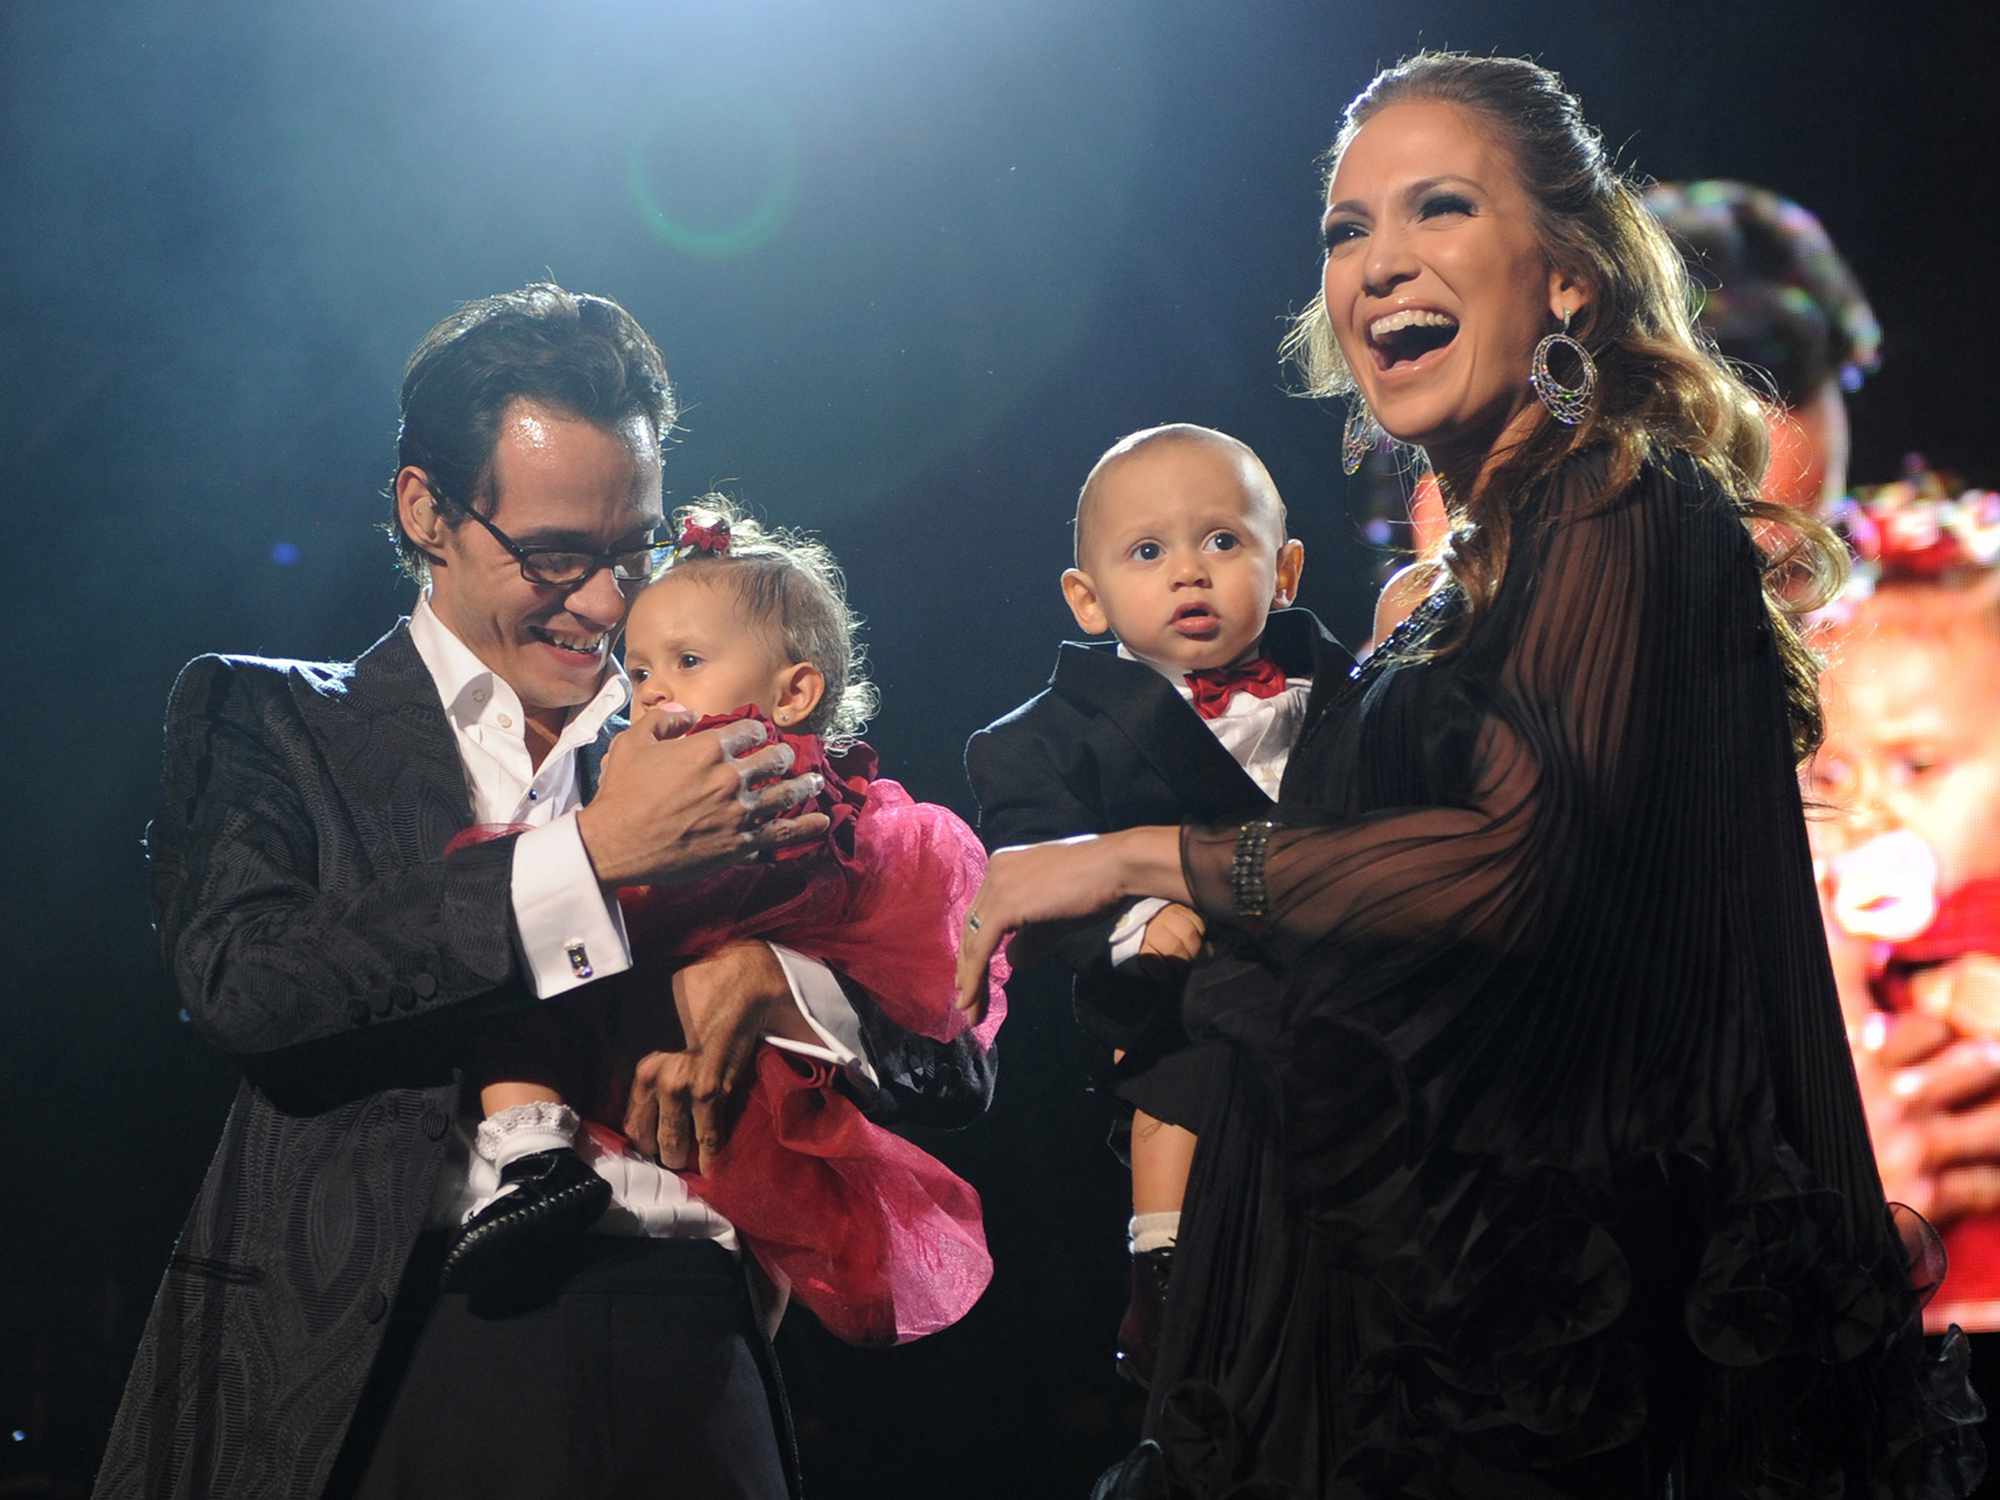 Marc Anthony, Jennifer Lopez and their kids Max and Emme on stage